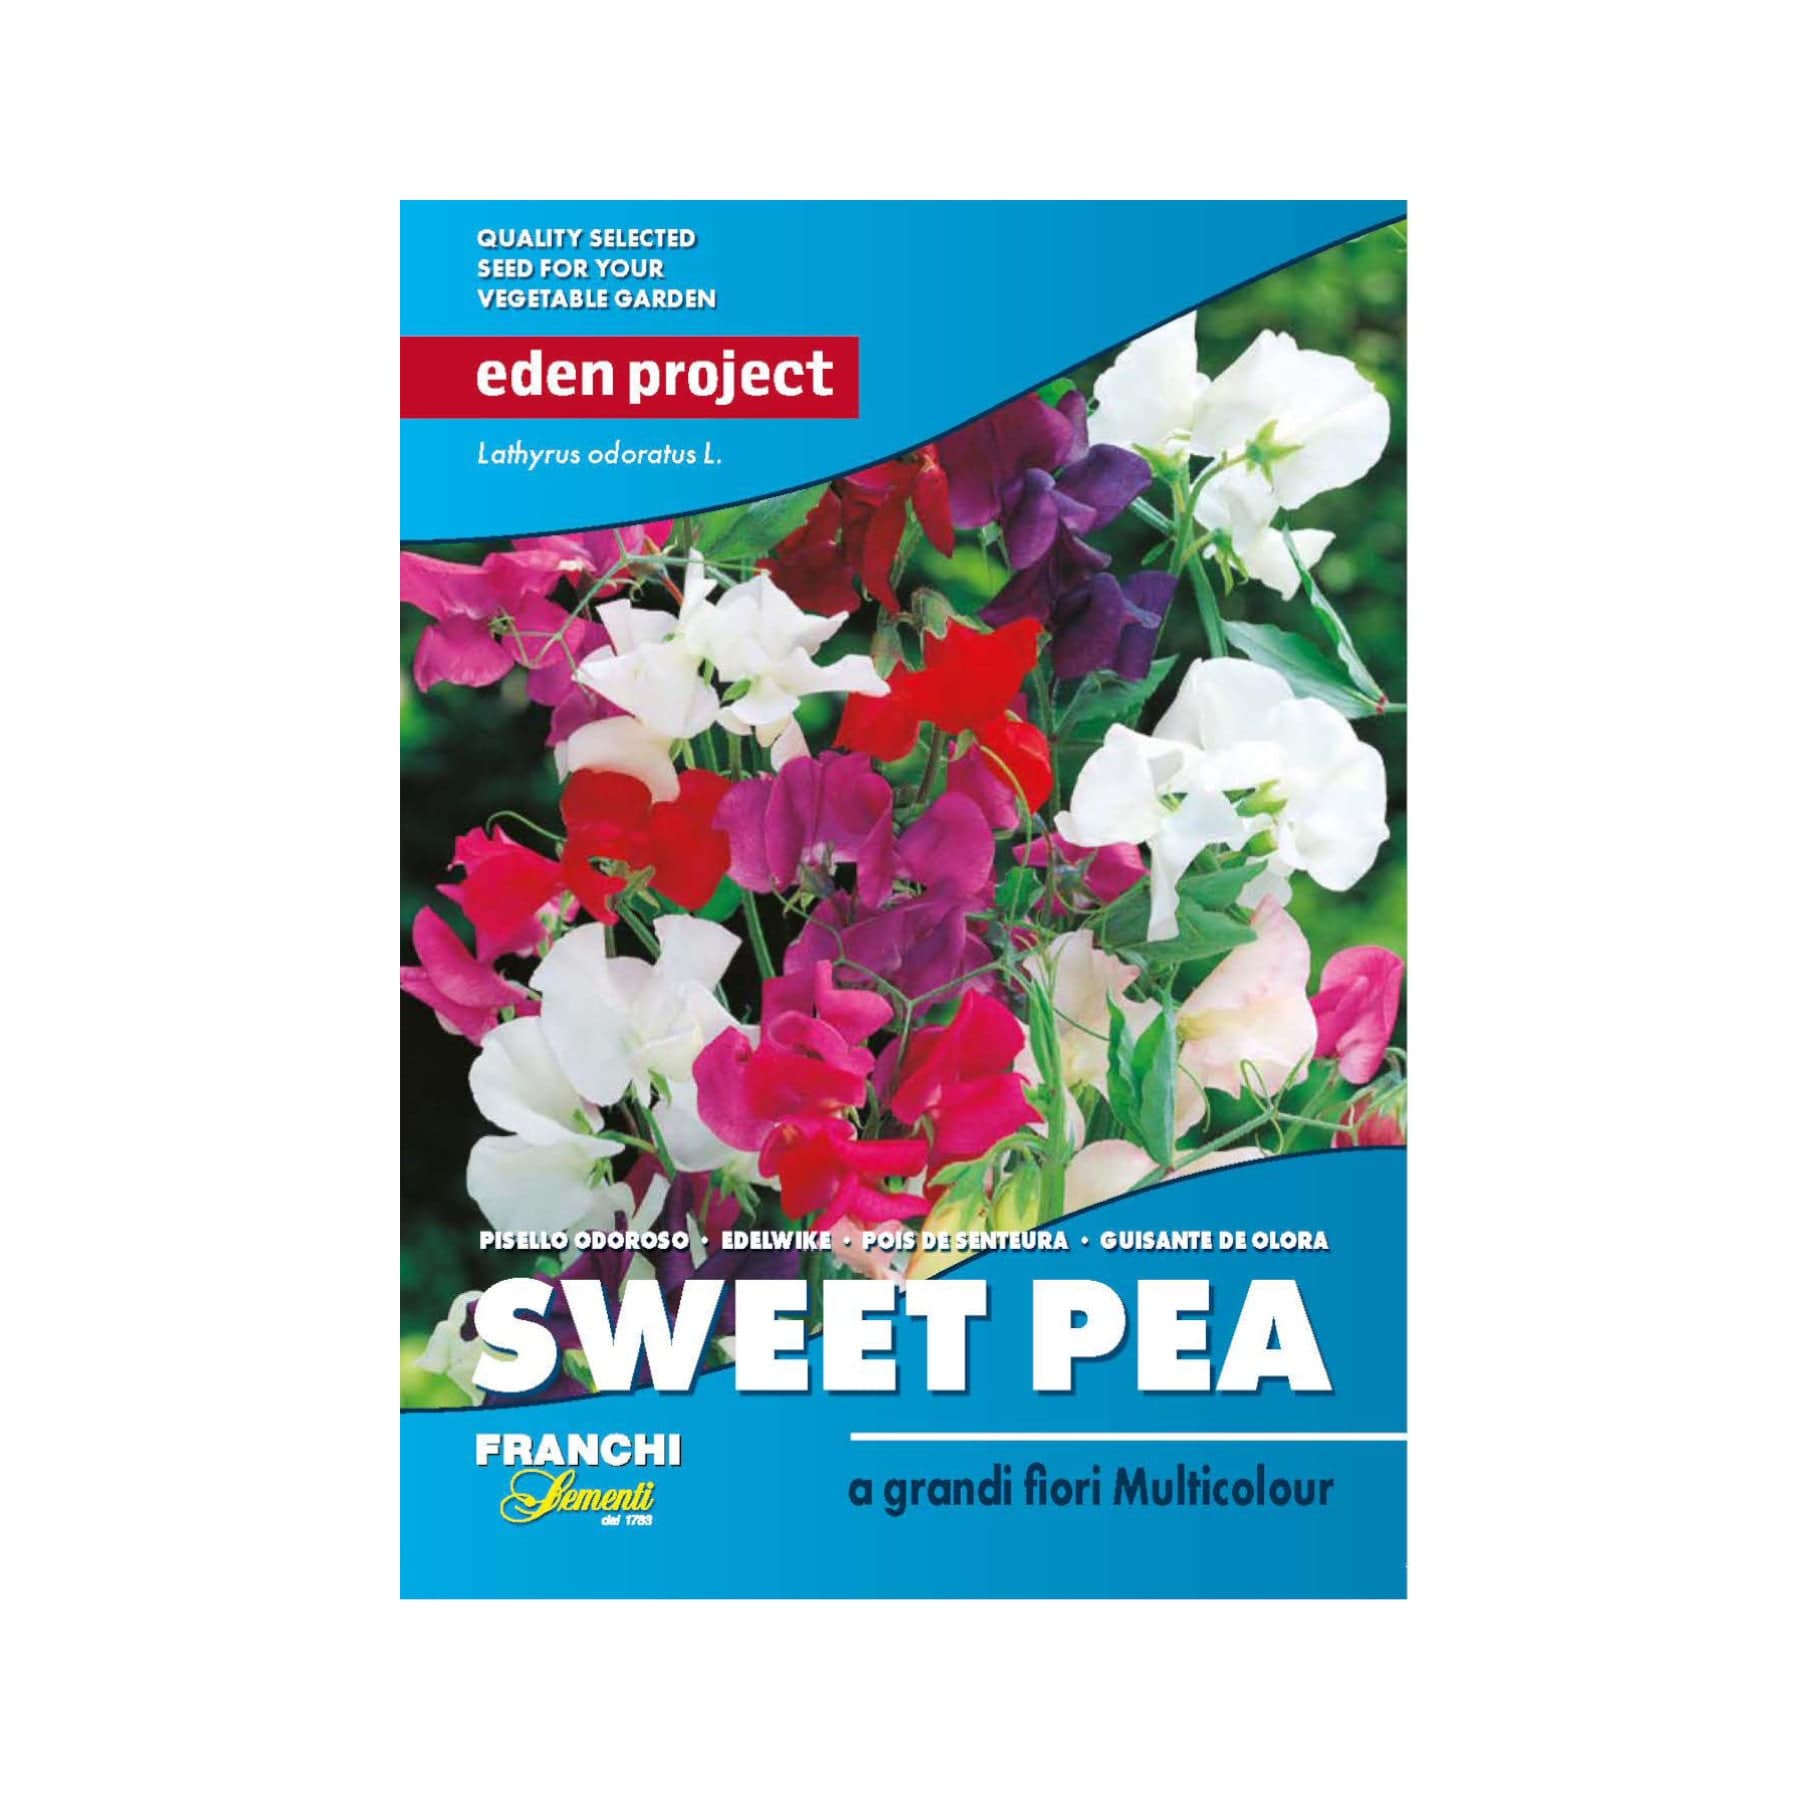 Eden Project Sweet Pea seed packet by Franchi Sementi featuring multicolored Lathyrus odoratus flowers, quality garden seeds advertisement with vibrant red, white, and purple blossoms.